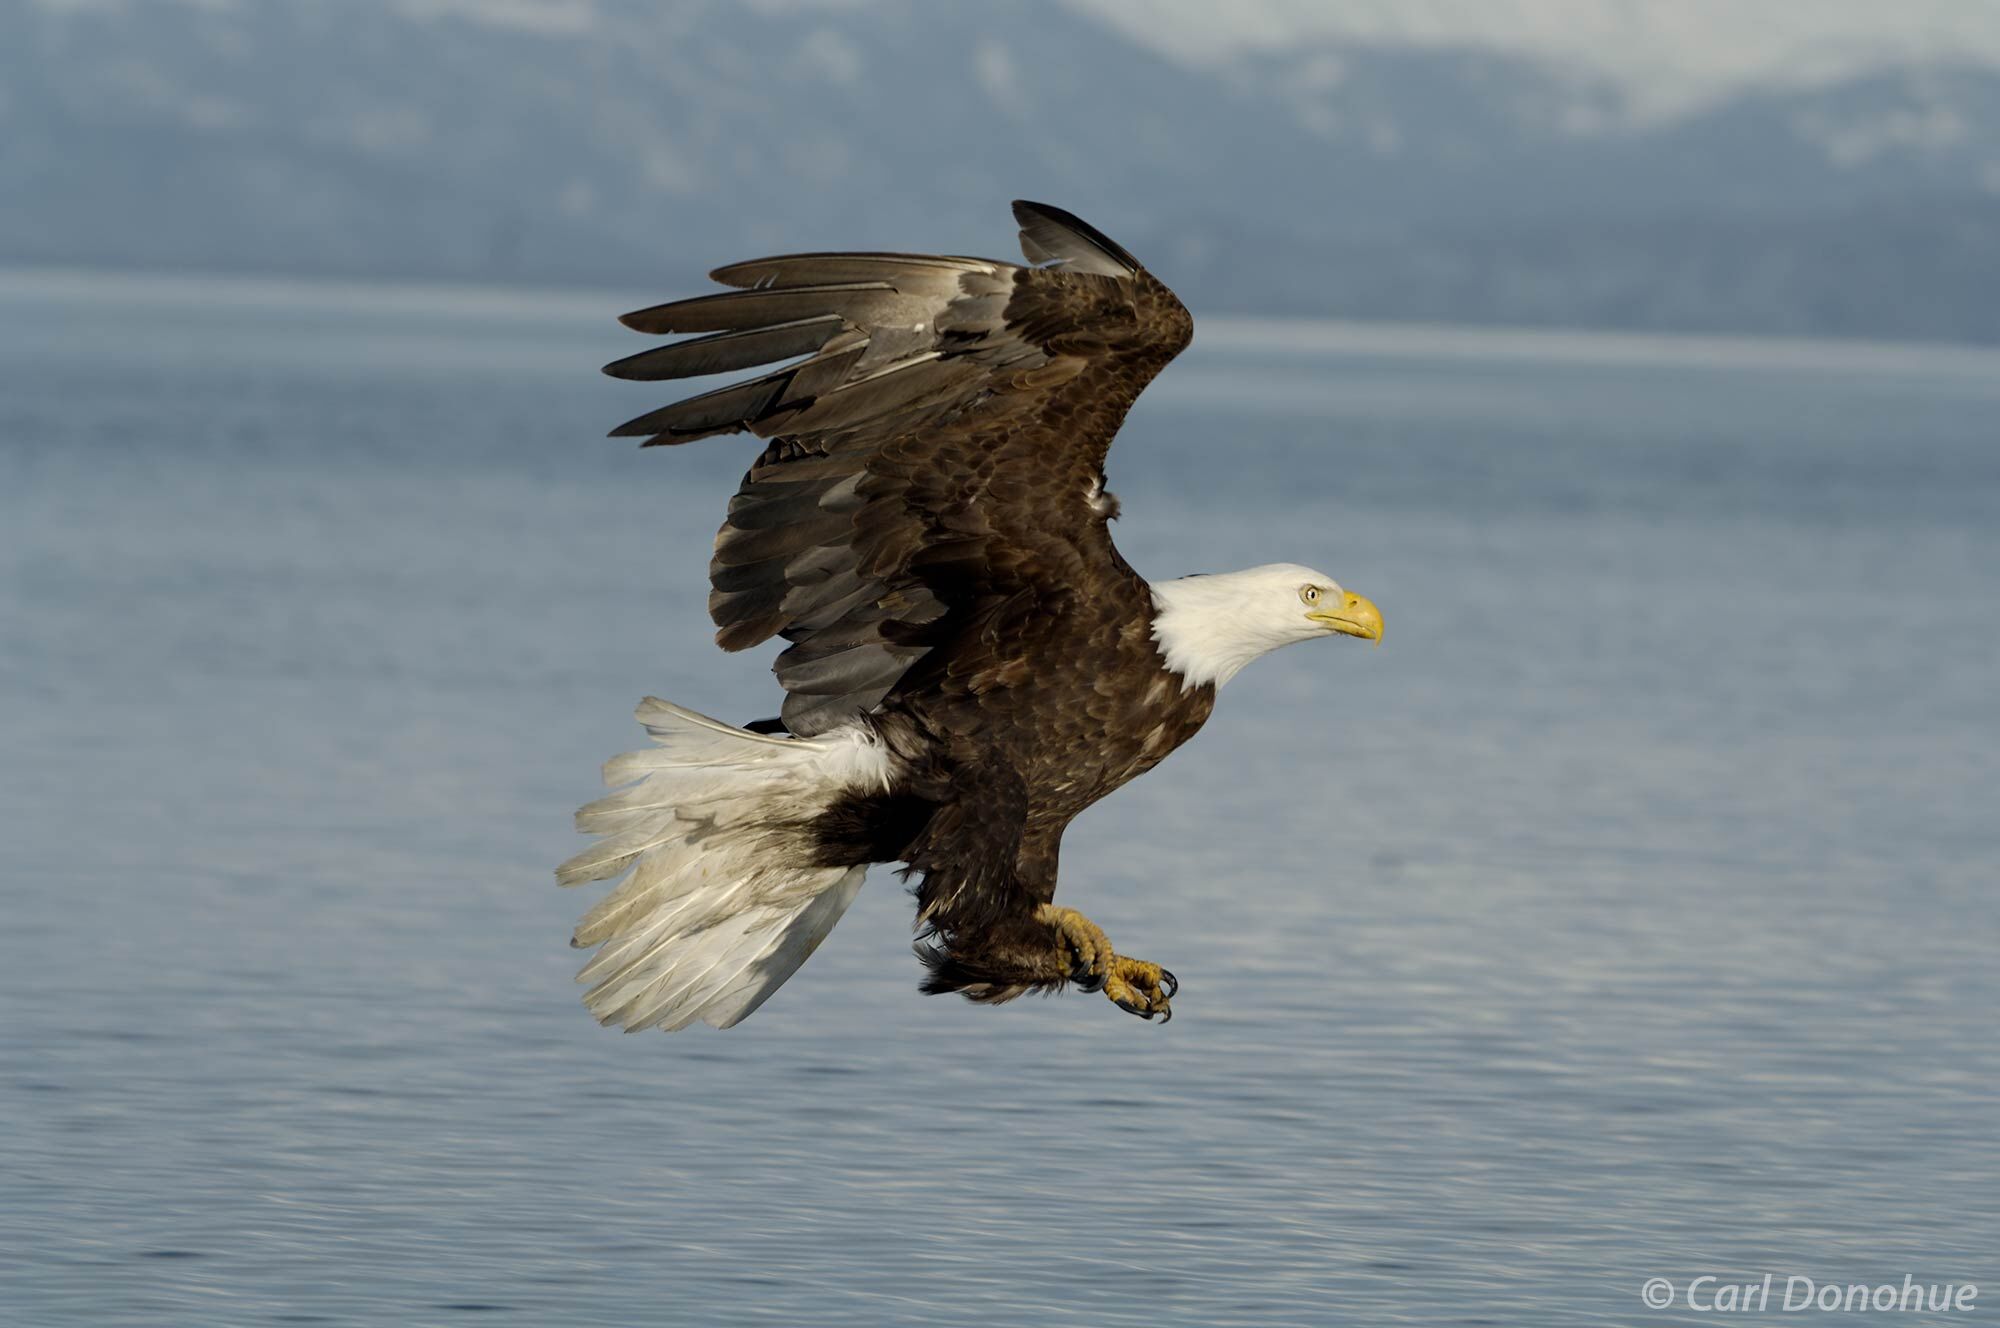 A blur of brown and white, the bald eagle swoops down towards the water, its talons outstretched as it goes in for the catch....